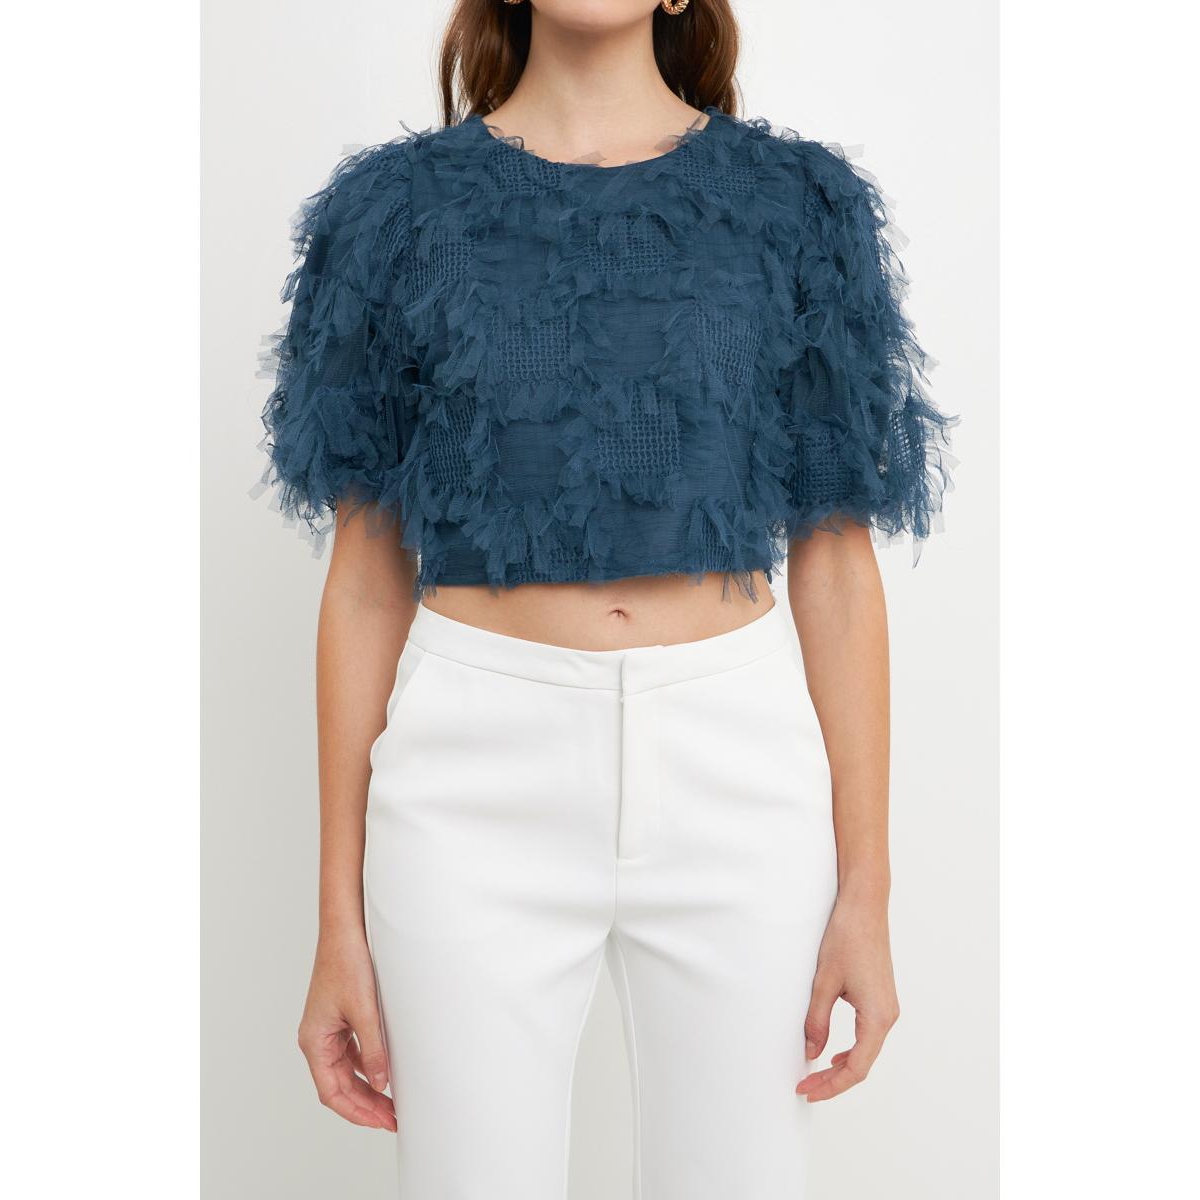 ENDLESS ROSE WOMEN'S GRIDDED MESH FEATHERED CROPPED TOP